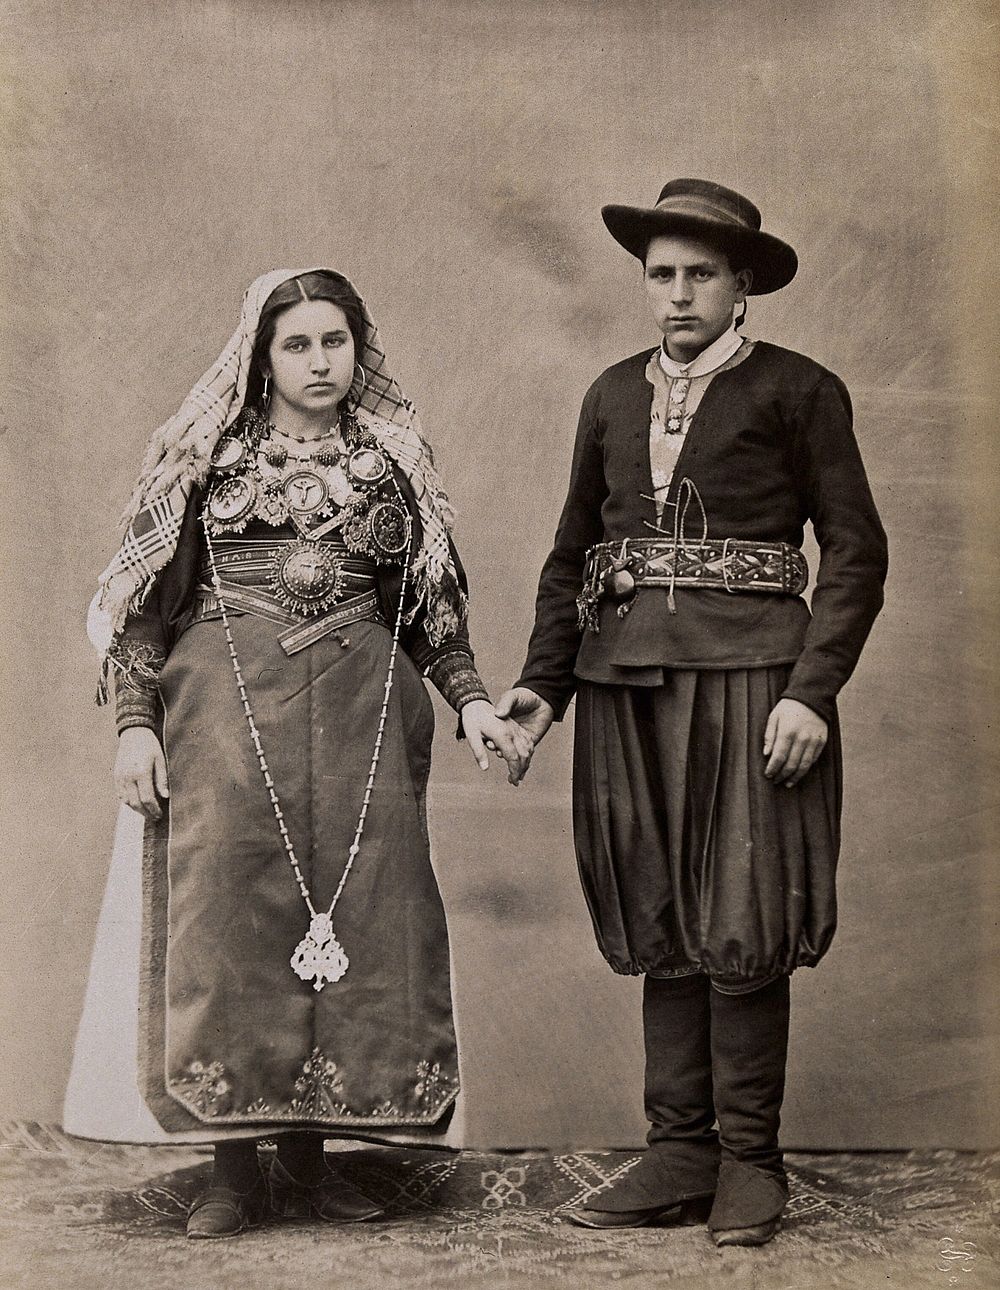 People of Leon, a man and woman holding hands, wearing traditional dress.